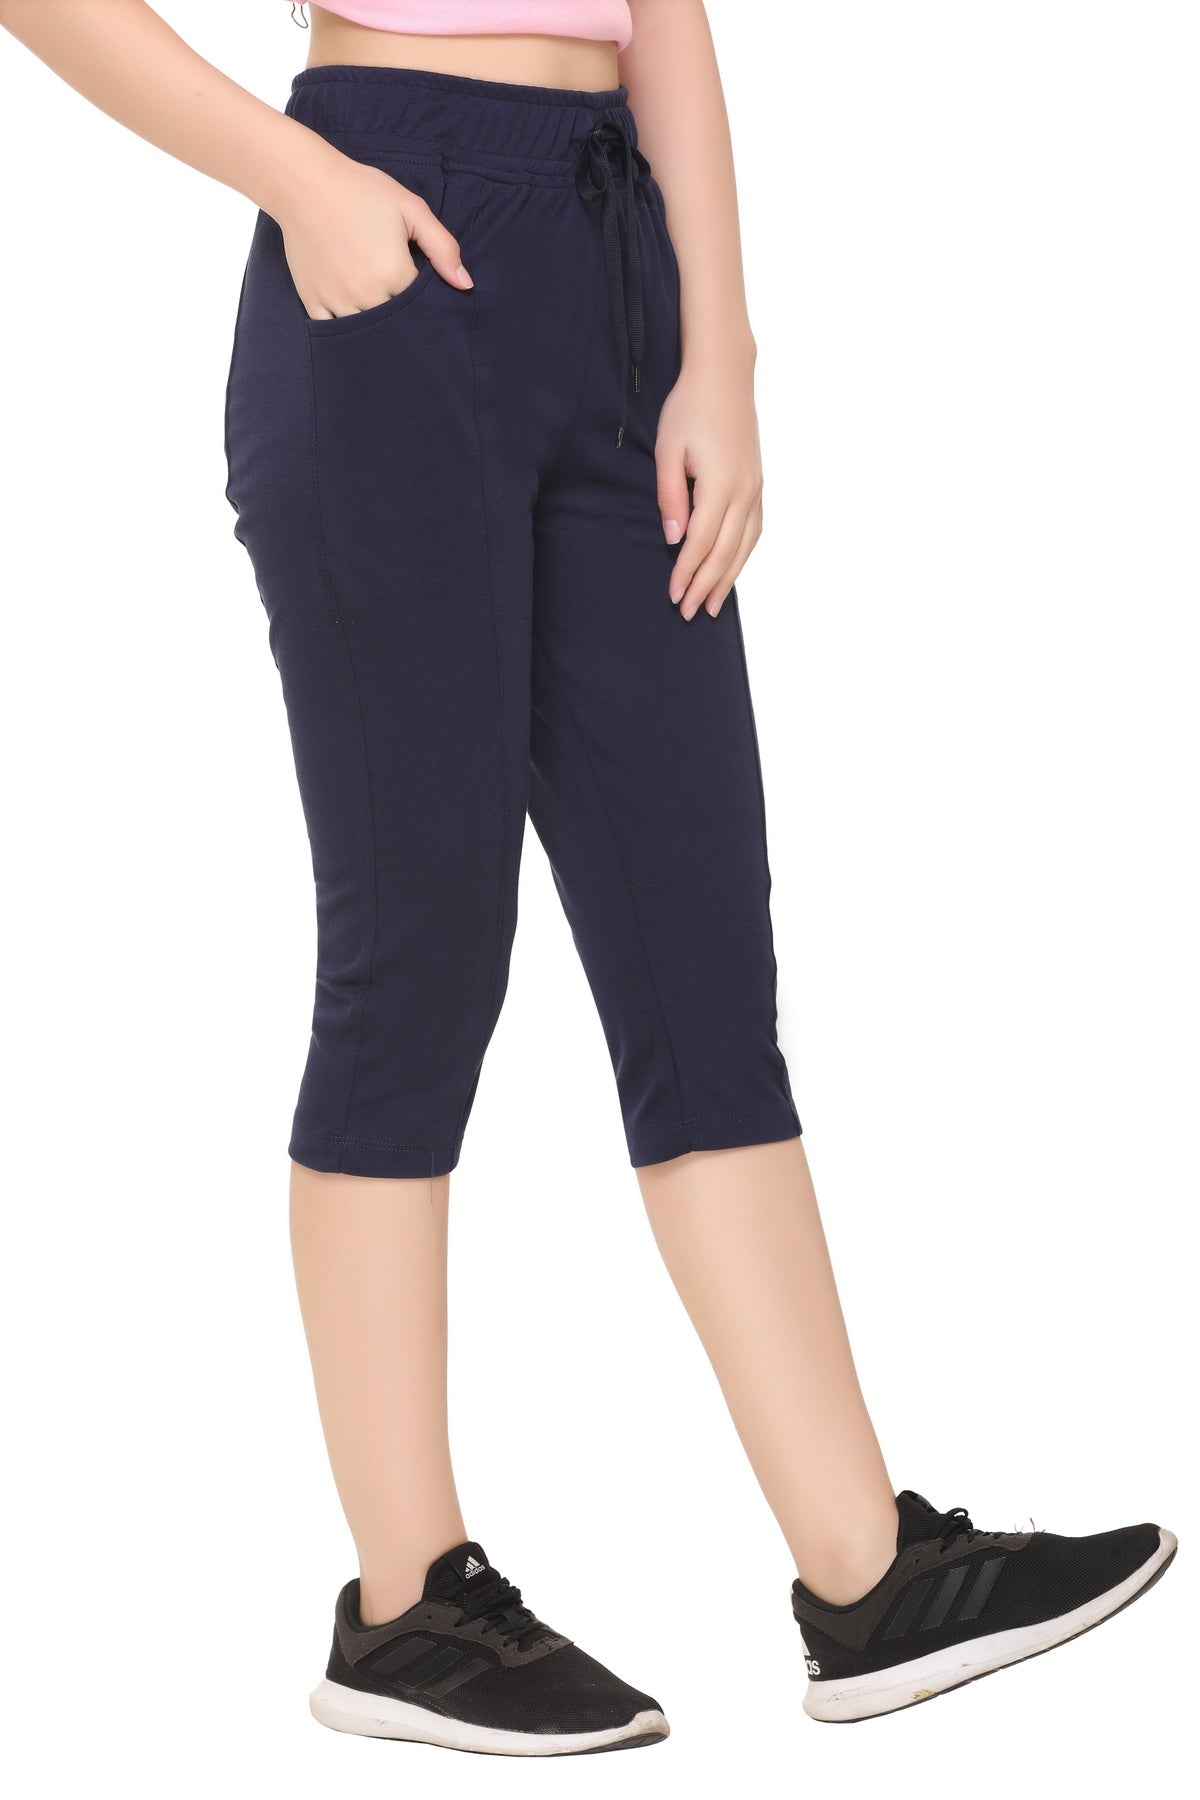 Buy theRebelinme Plus Size Womens Black Solid Color Wait Tie-Up Cotton  Knitted Capris online